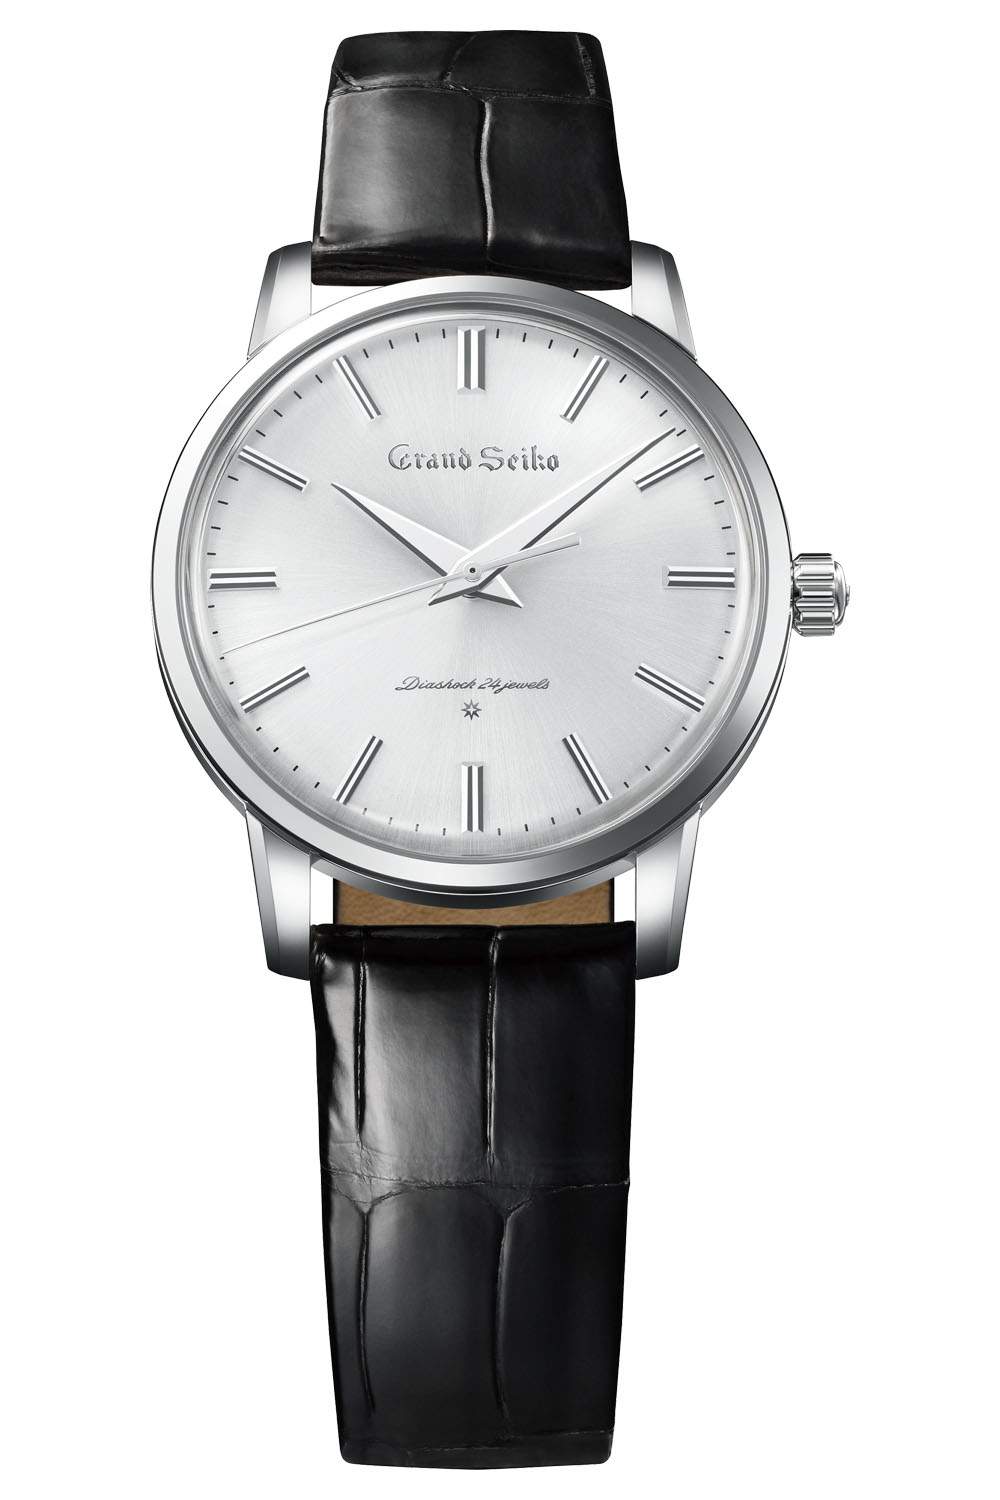 Grand Seiko 60th Anniversary Re-Creation of the first 1960 - SBGW257